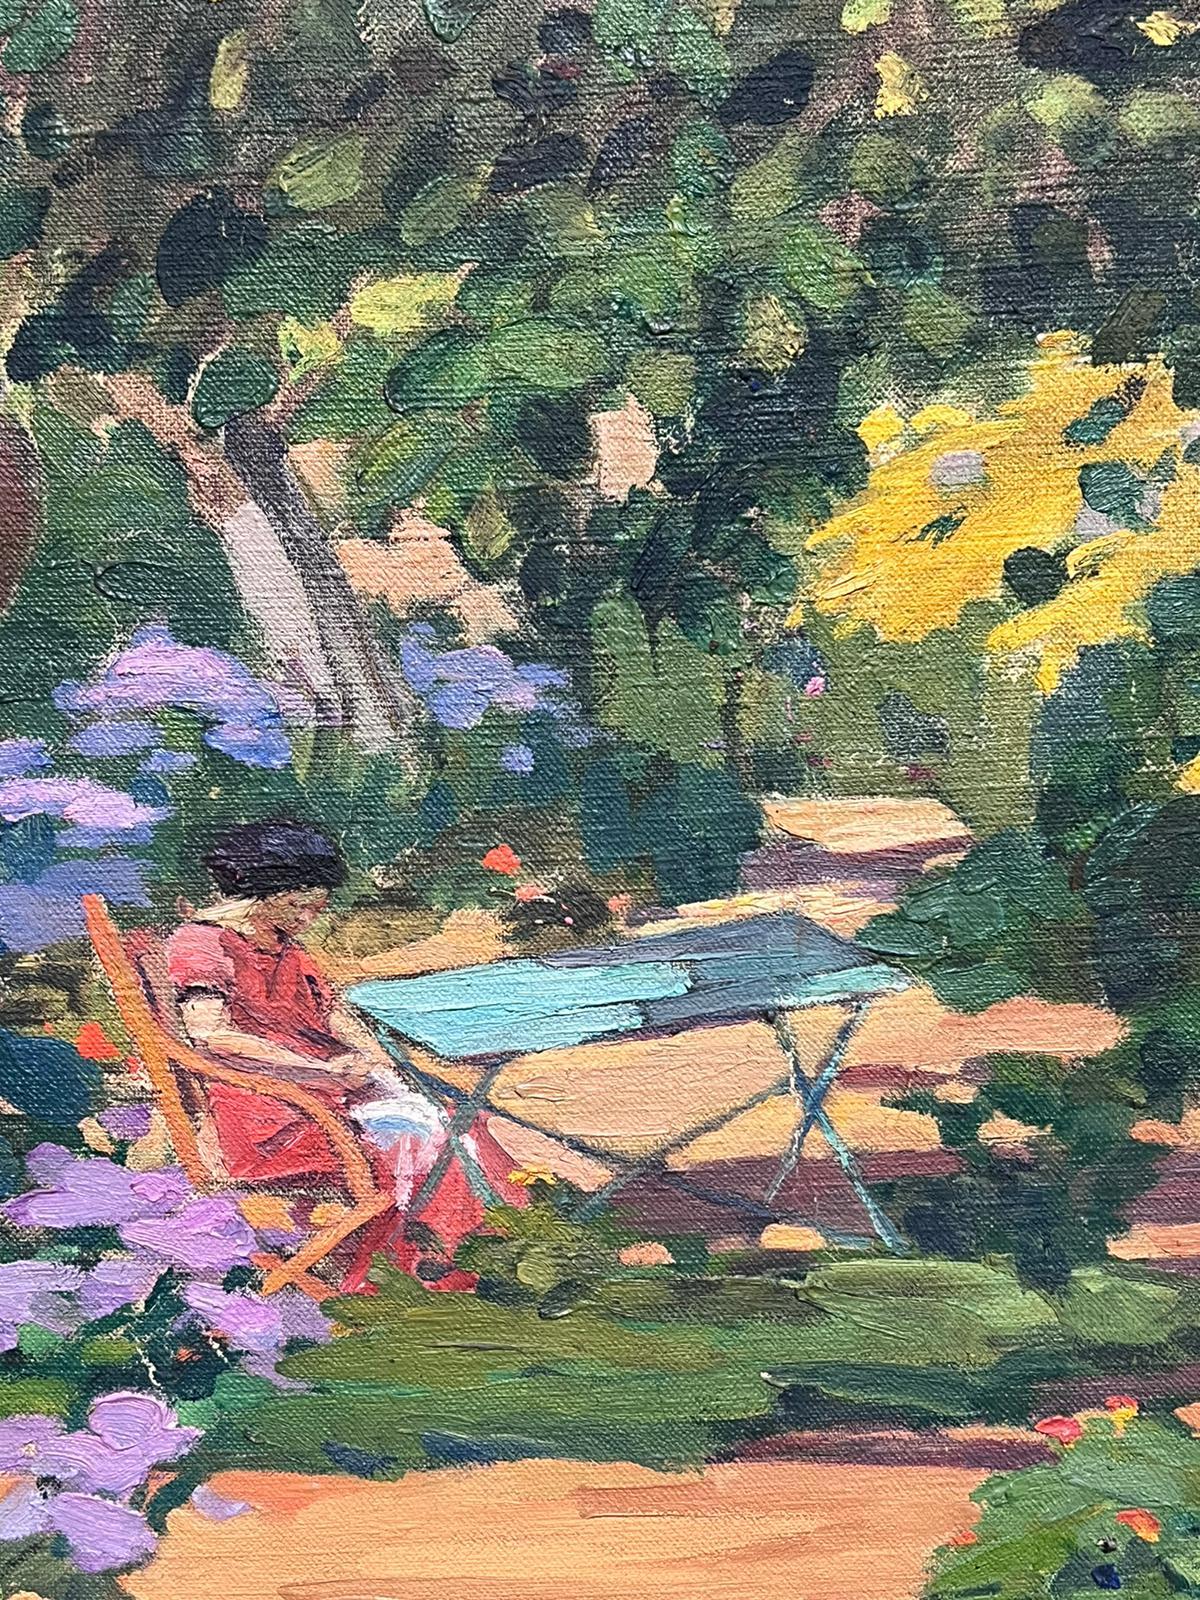 The Garden Bench
by Louise Alix (French, 1888-1980) *see notes below
oil painting on canvas unframed
measures: 18 inches high by 20 inches wide
condition: overall very good and sound, a few scuffs and marks to the surface and wear to the four